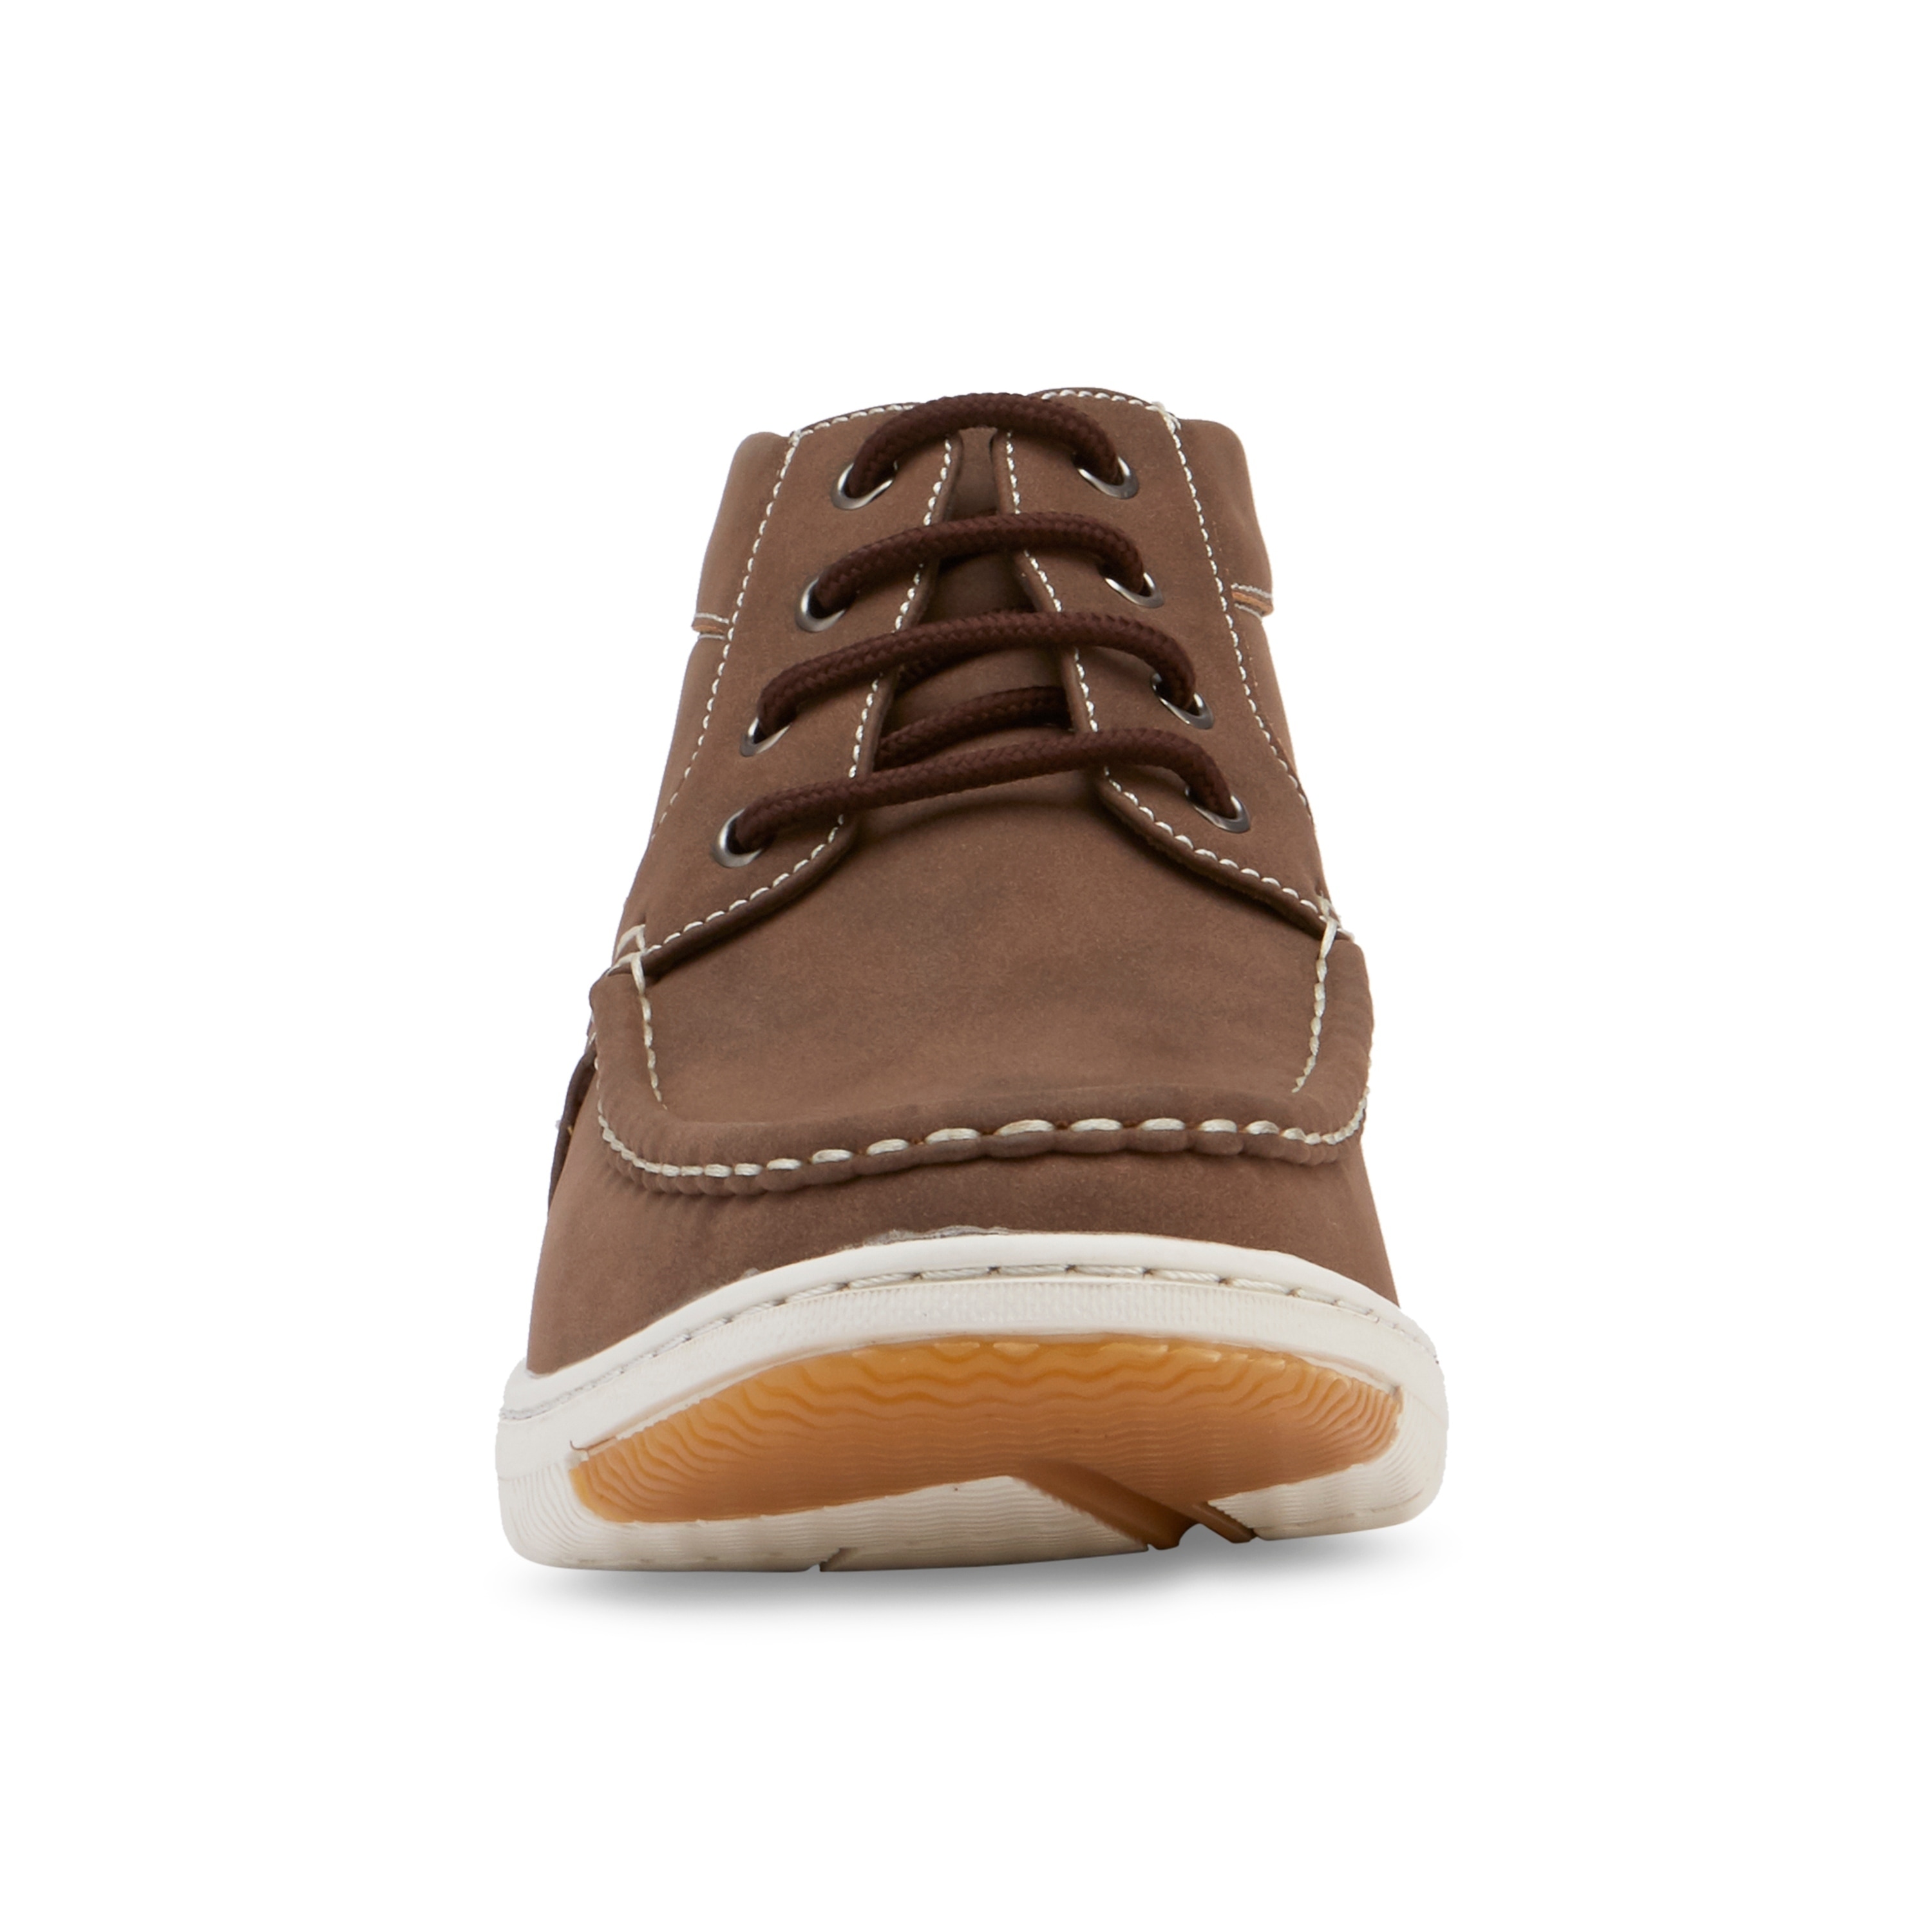 mens high top boat shoes